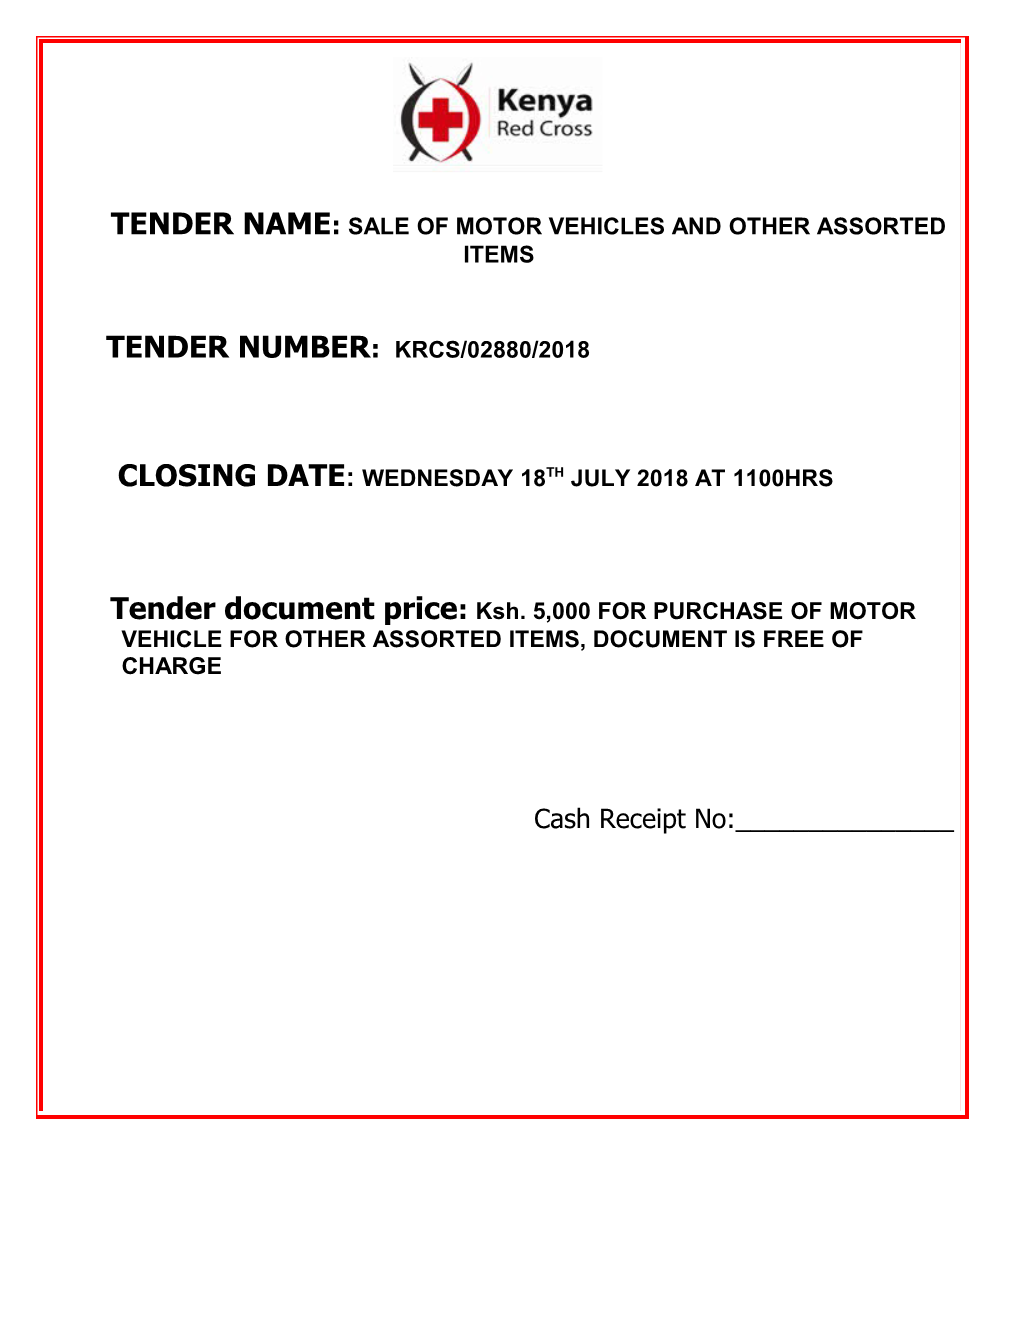 Tender Name: Sale of Motor Vehicles and Other Assorted Items